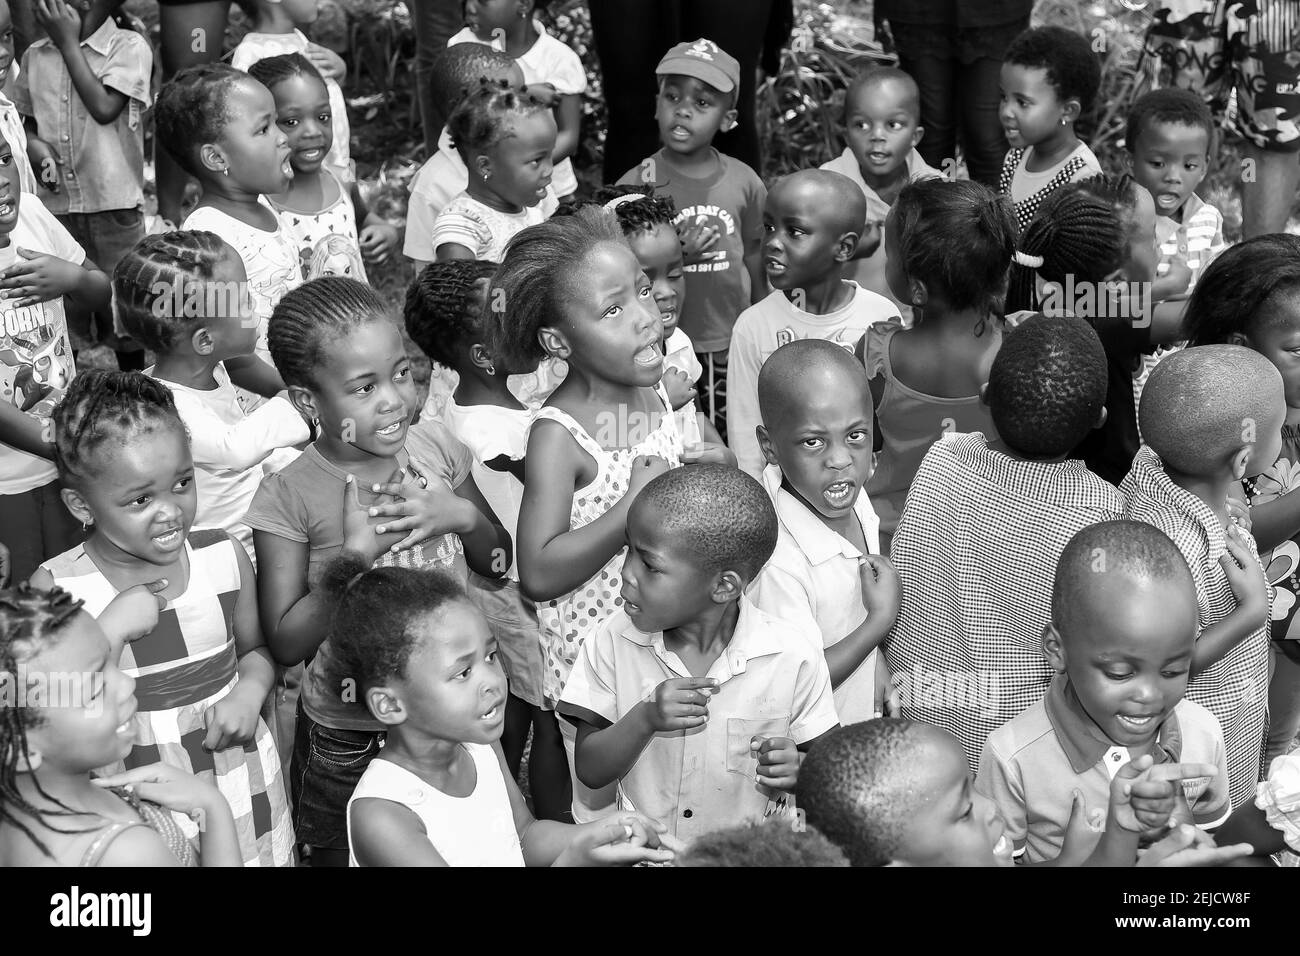 JOHANNESBURG, SOUTH AFRICA - Feb 20, 2021: Soweto, South Africa - November 16, 2012: Young African Preschool kids singing songs in the playground of a Stock Photo